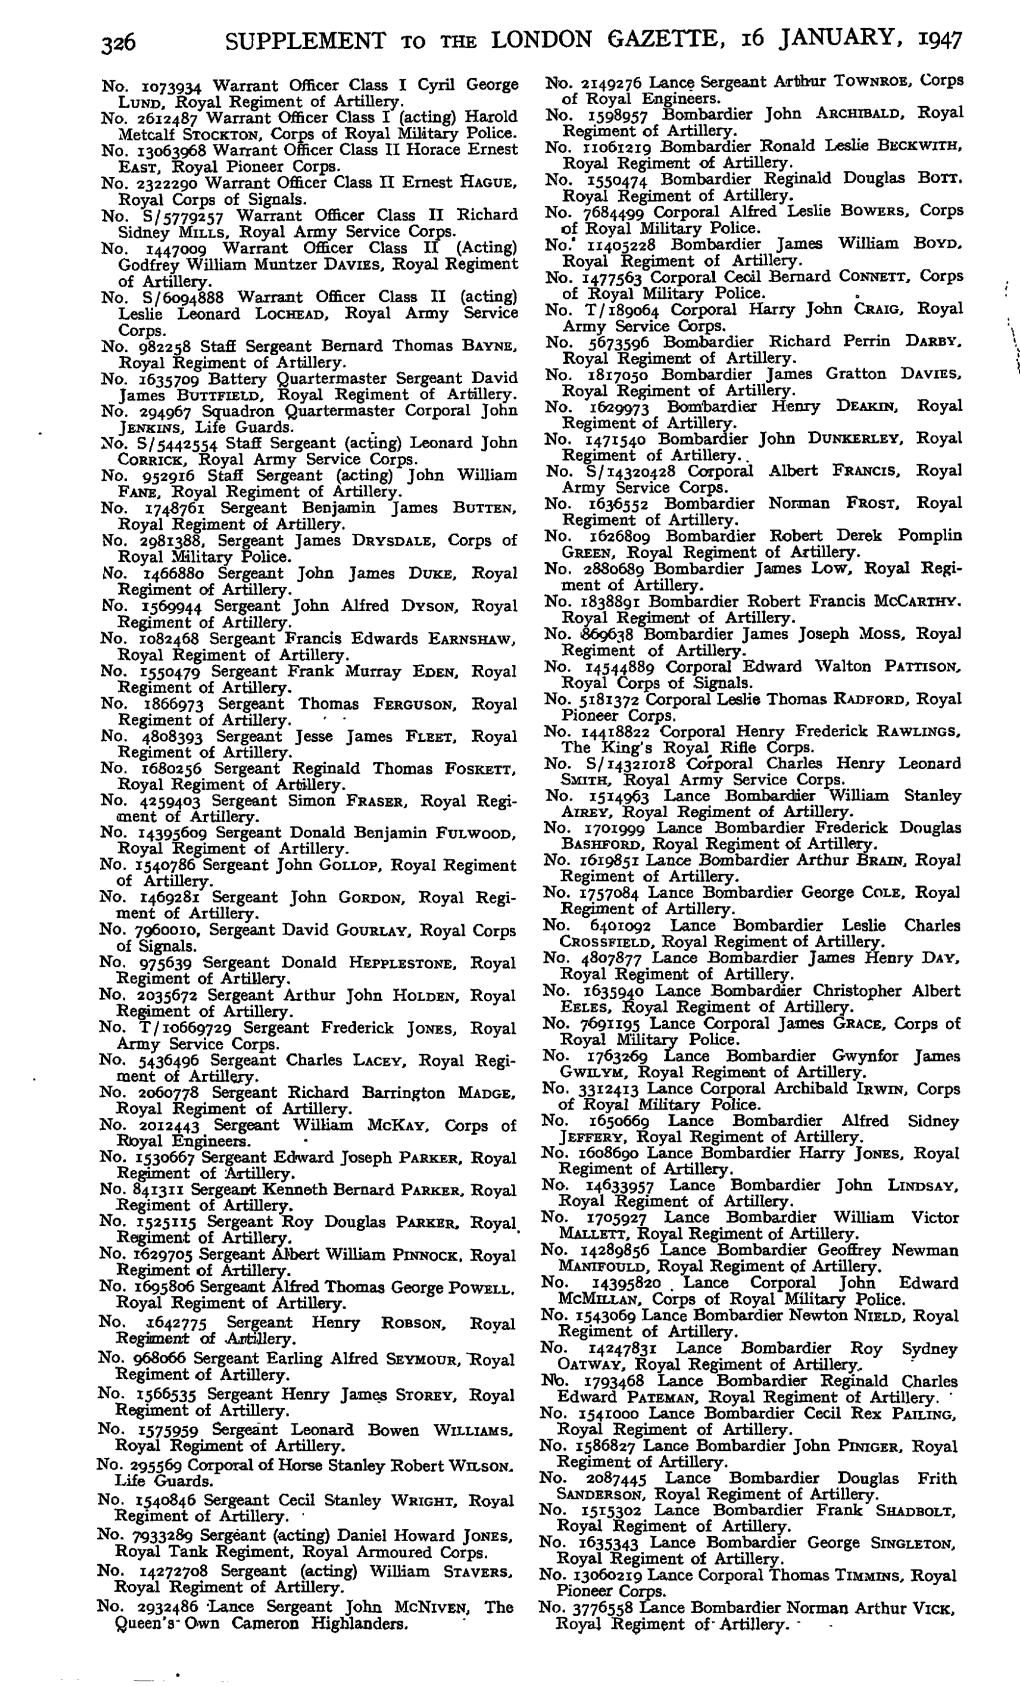 326 Supplement to the London Gazette, 16 January, 1947